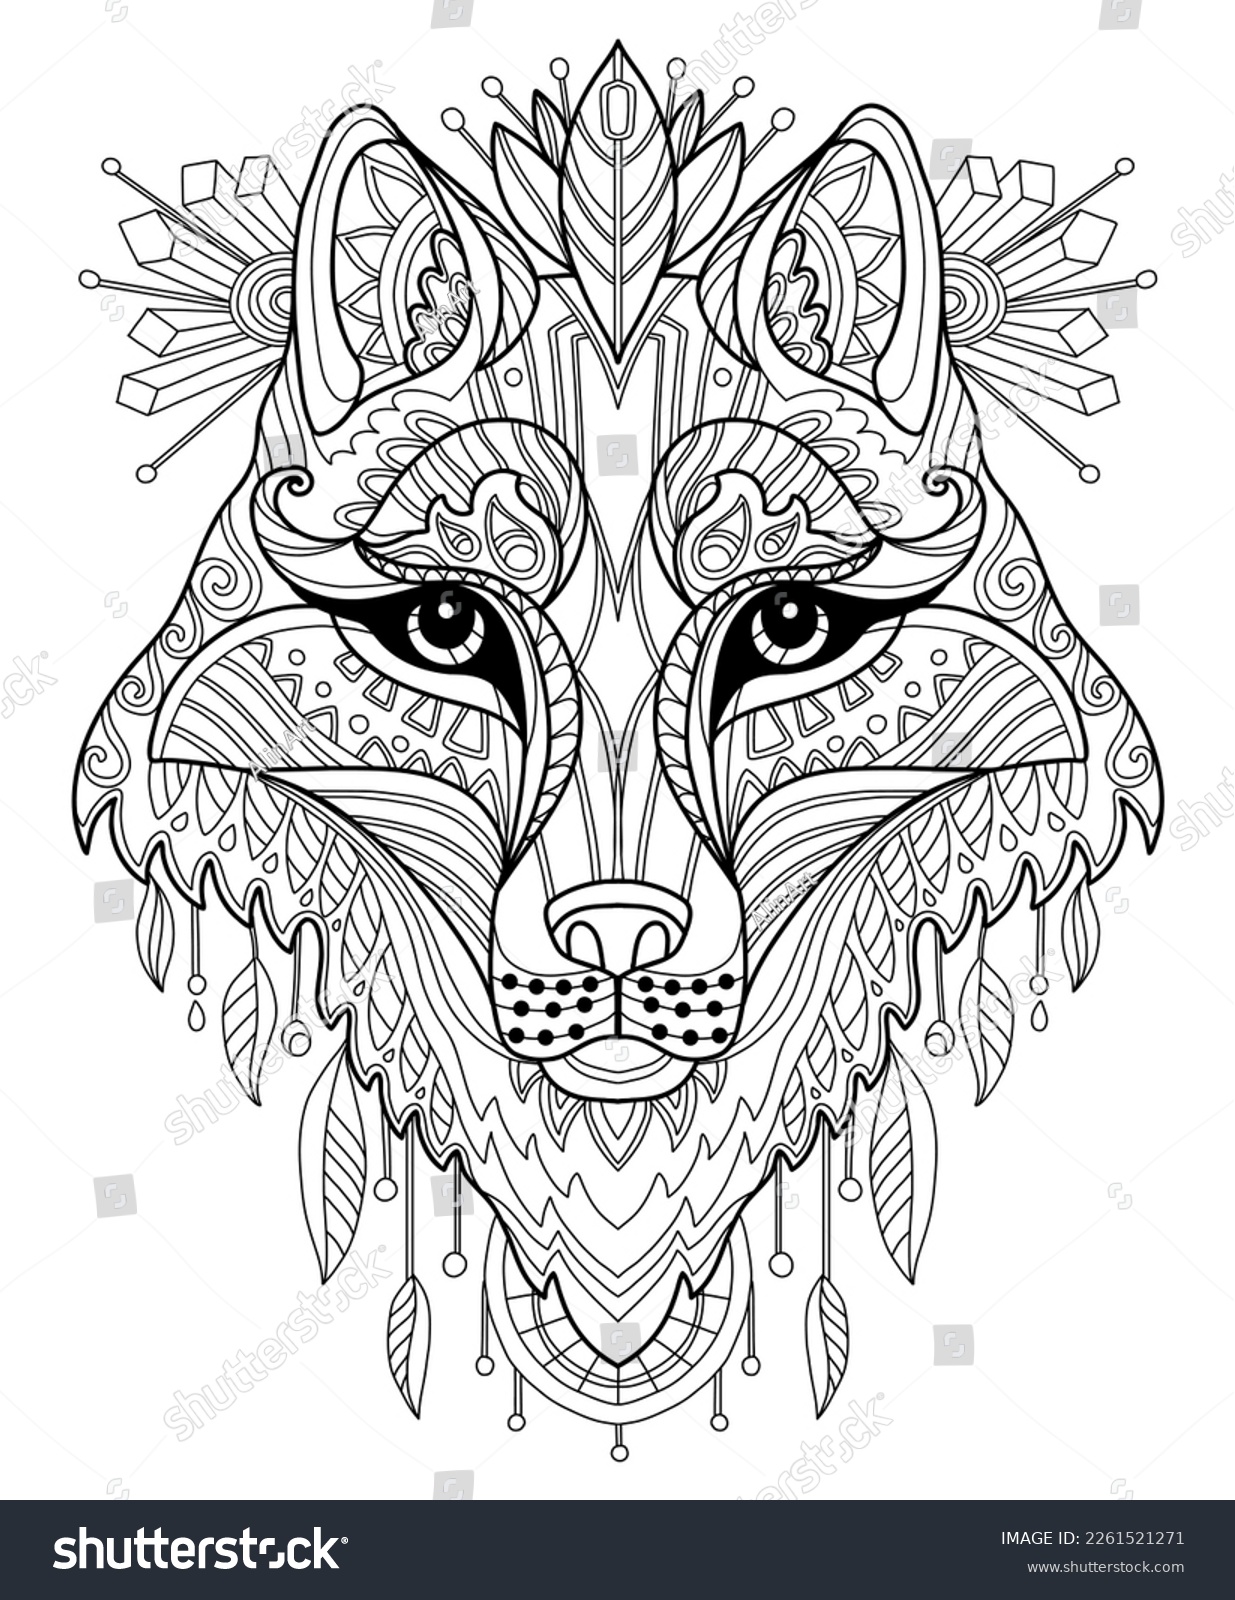 SVG of Stylized head of wolf close up. Hand drawn sketch black contour vector illustration. For adult antistress coloring page, print, design, decor, T-shirt, emblem, logo or tattoo ornate design elements. svg